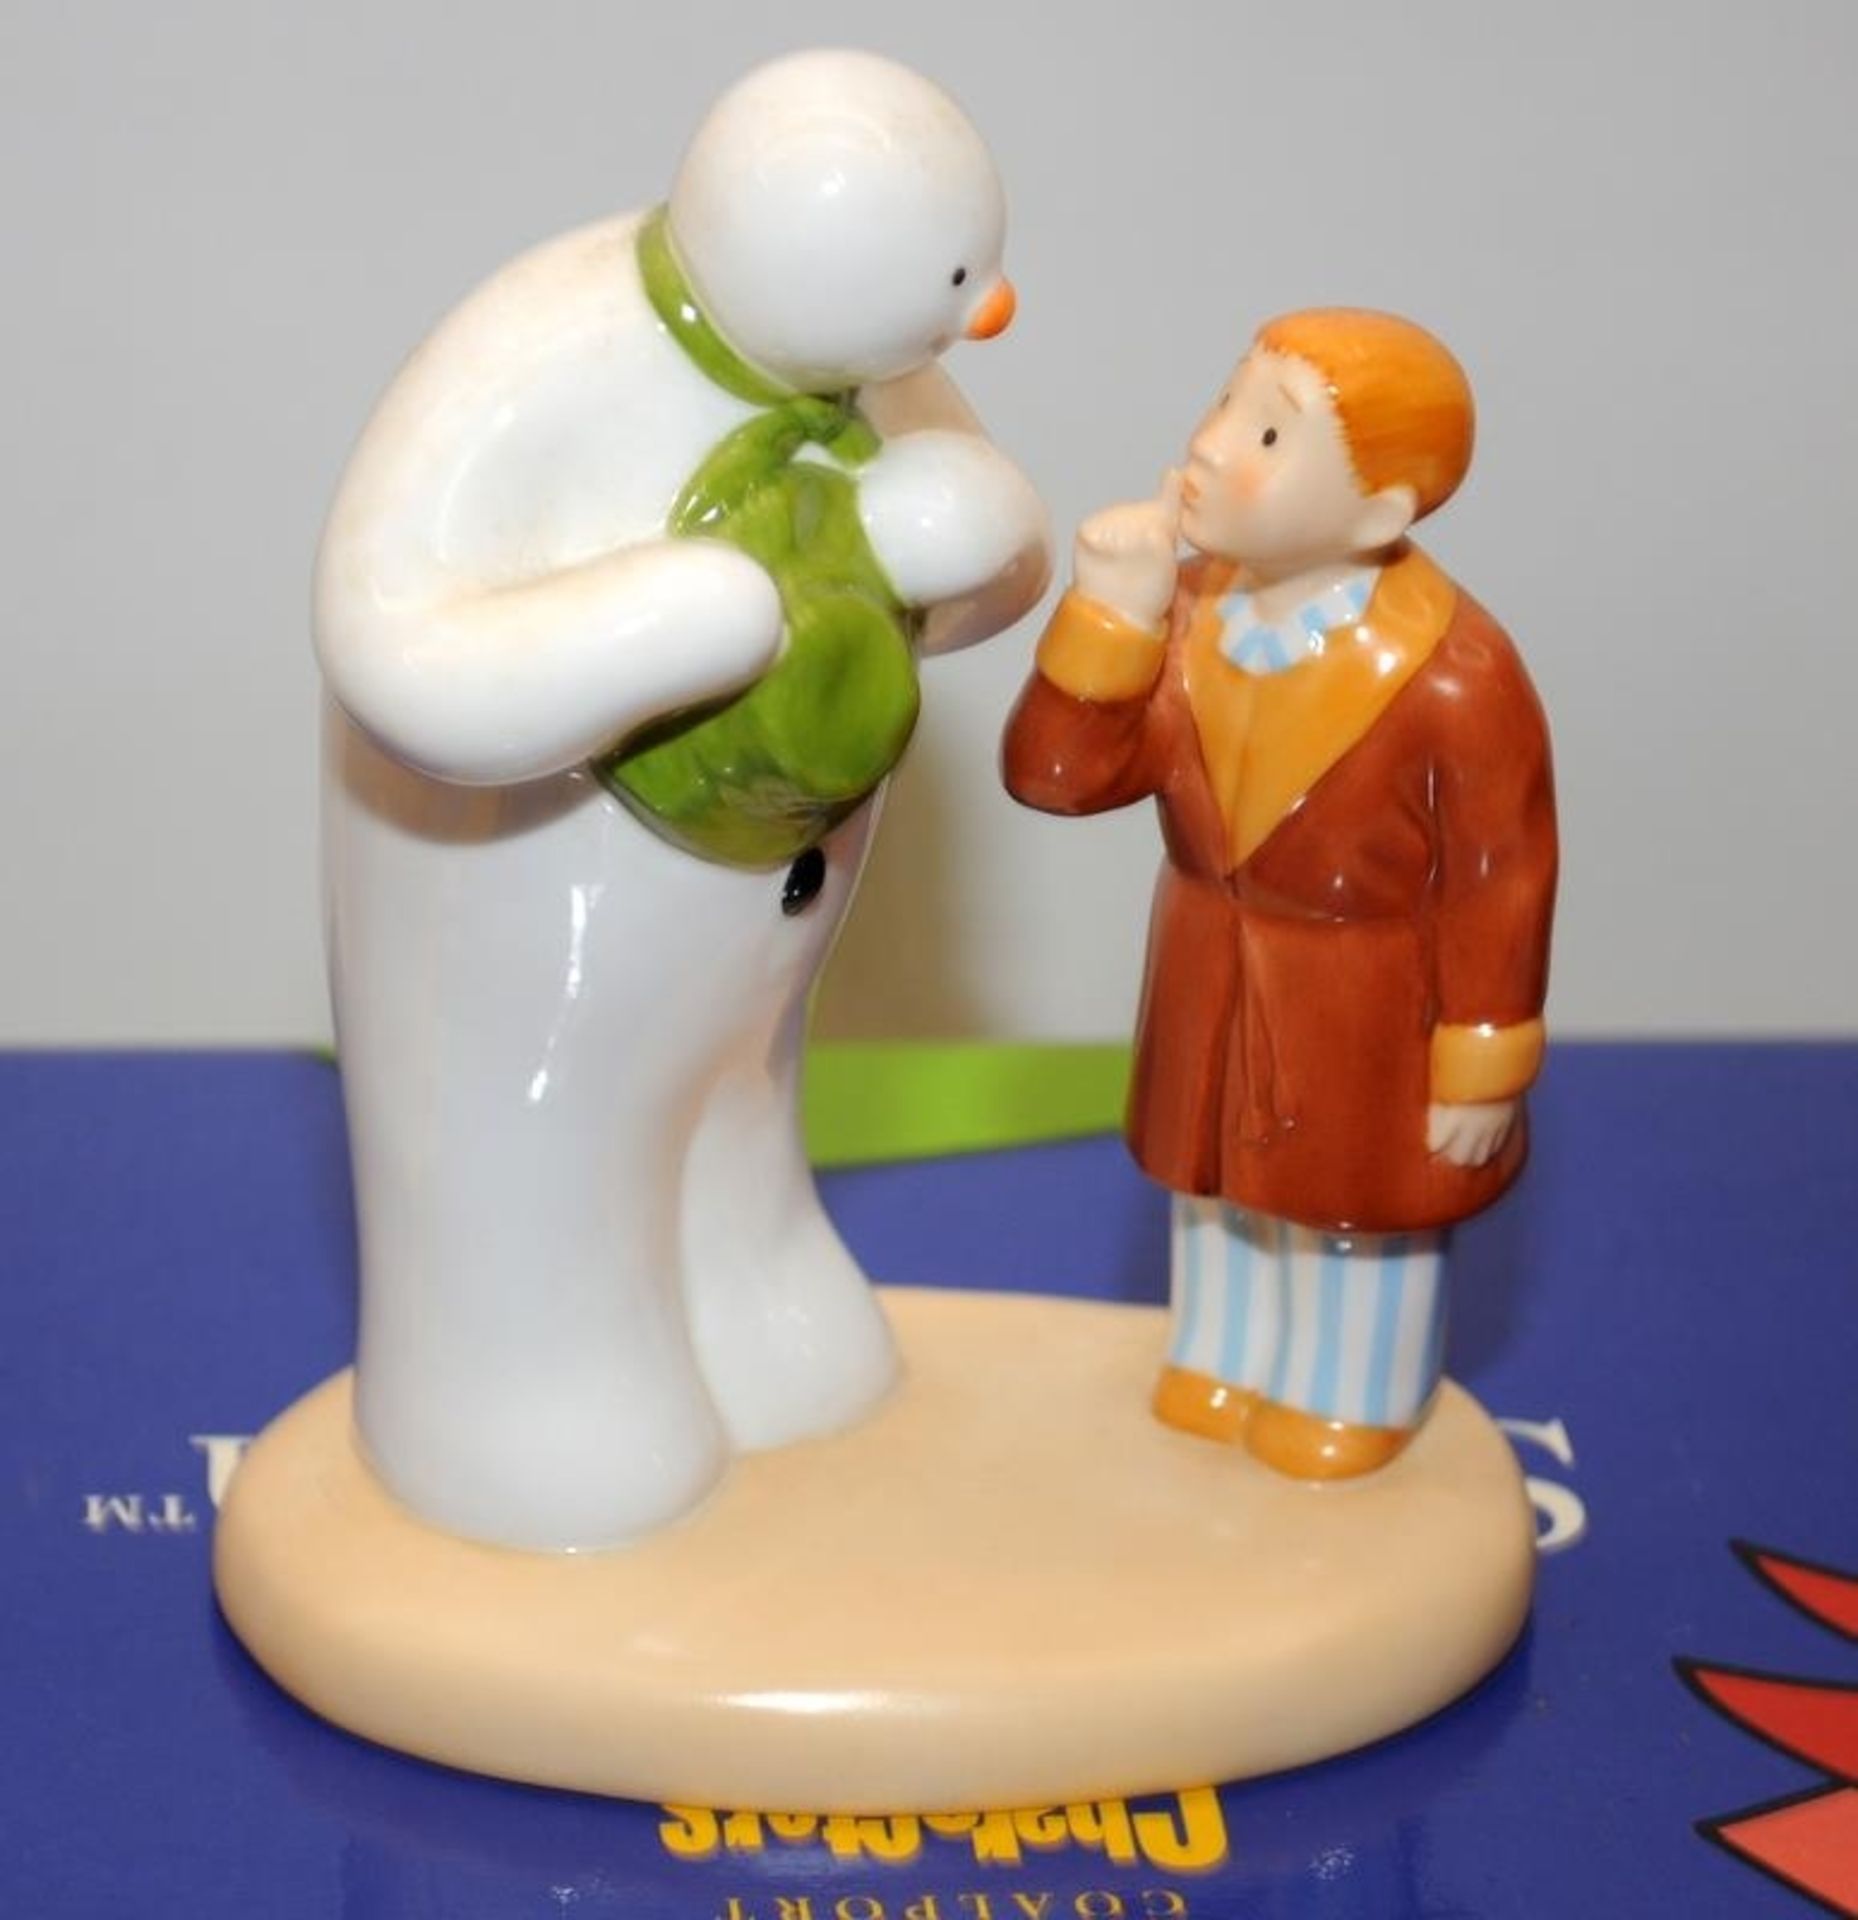 2 x Coalport The Snowman figurines: Hush! Don't Wake Them figure c/w Collectors Society exclusive - Image 2 of 5